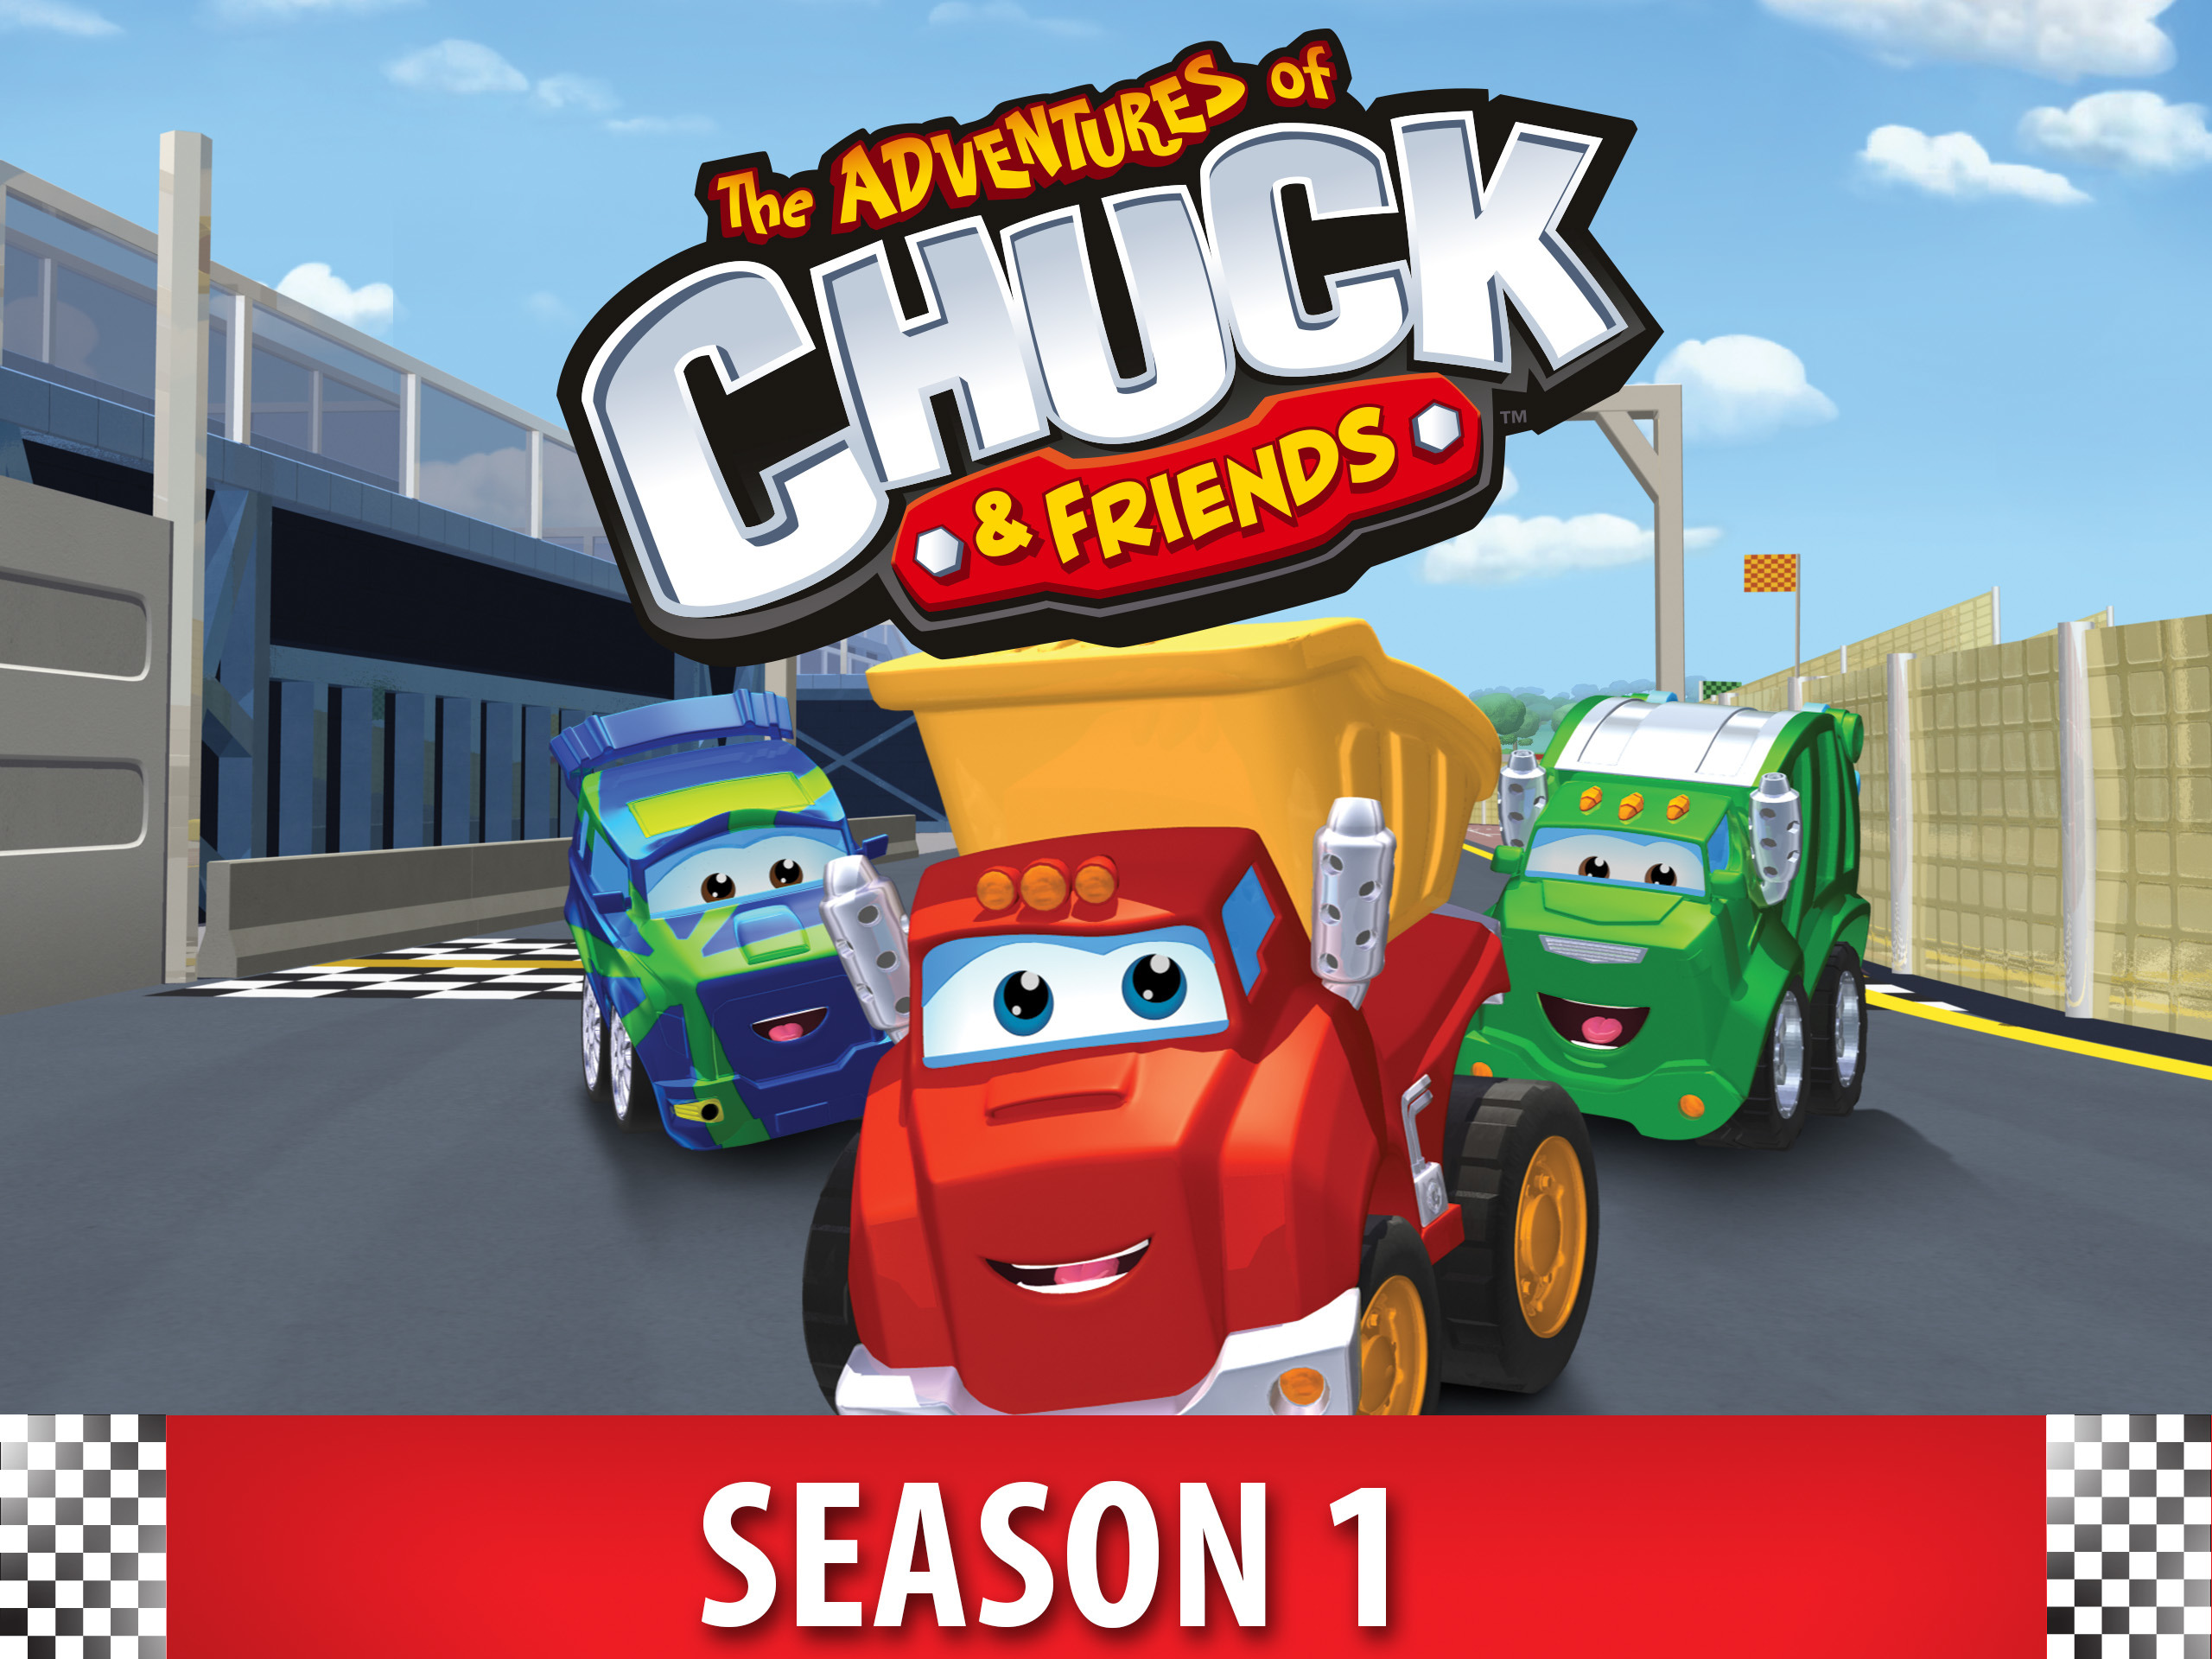 Prime Video The Adventures Of Chuck Friends